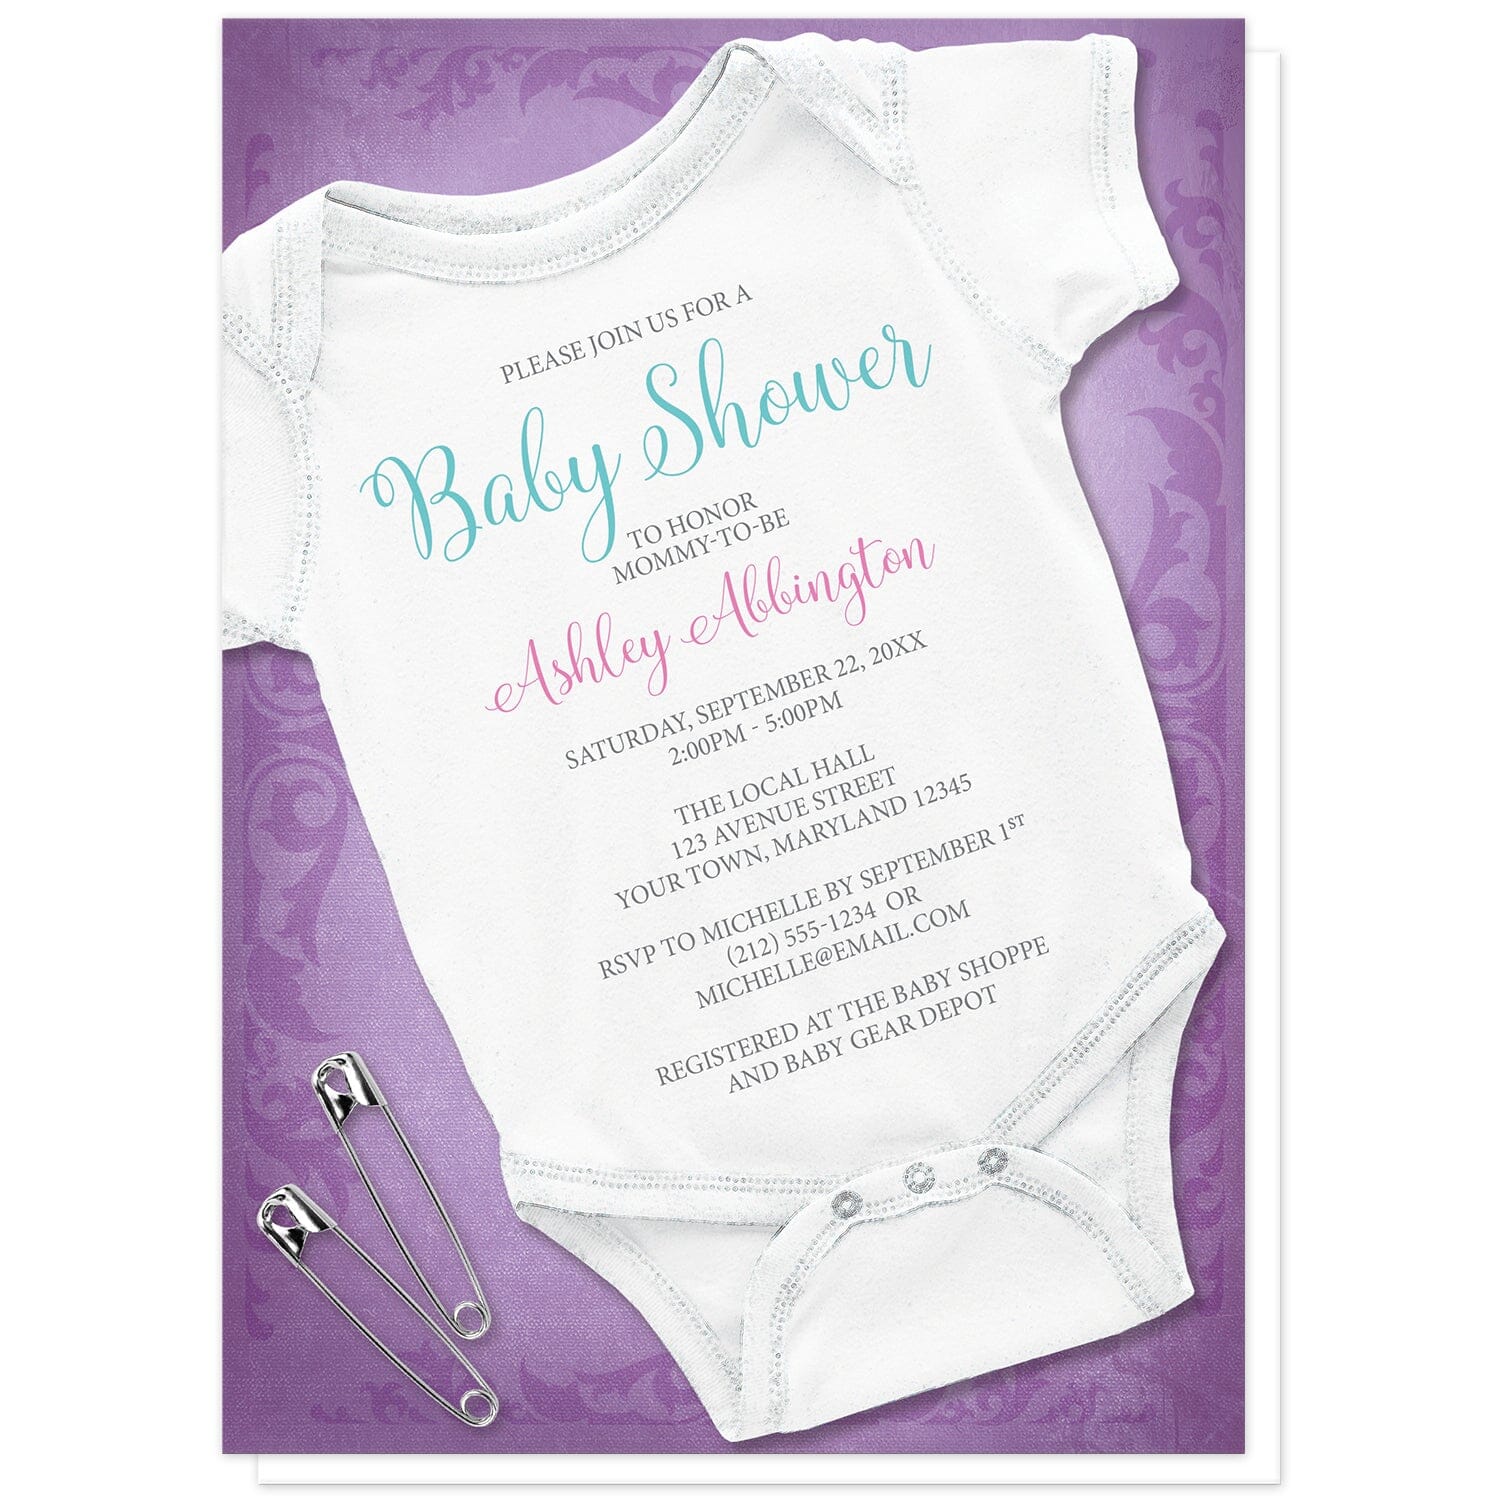 Baby Bodysuit and Safety Pins Purple Baby Shower Invitations at Artistically Invited. Baby bodysuit and safety pins purple baby shower invitations for the mommy-to-be designed with a white infant bodysuit and two safety pins to the side. These girl baby shower invitations feature your shower details in teal, pink, and gray over the white infant bodysuit, over a uniquely detailed purple background design. 